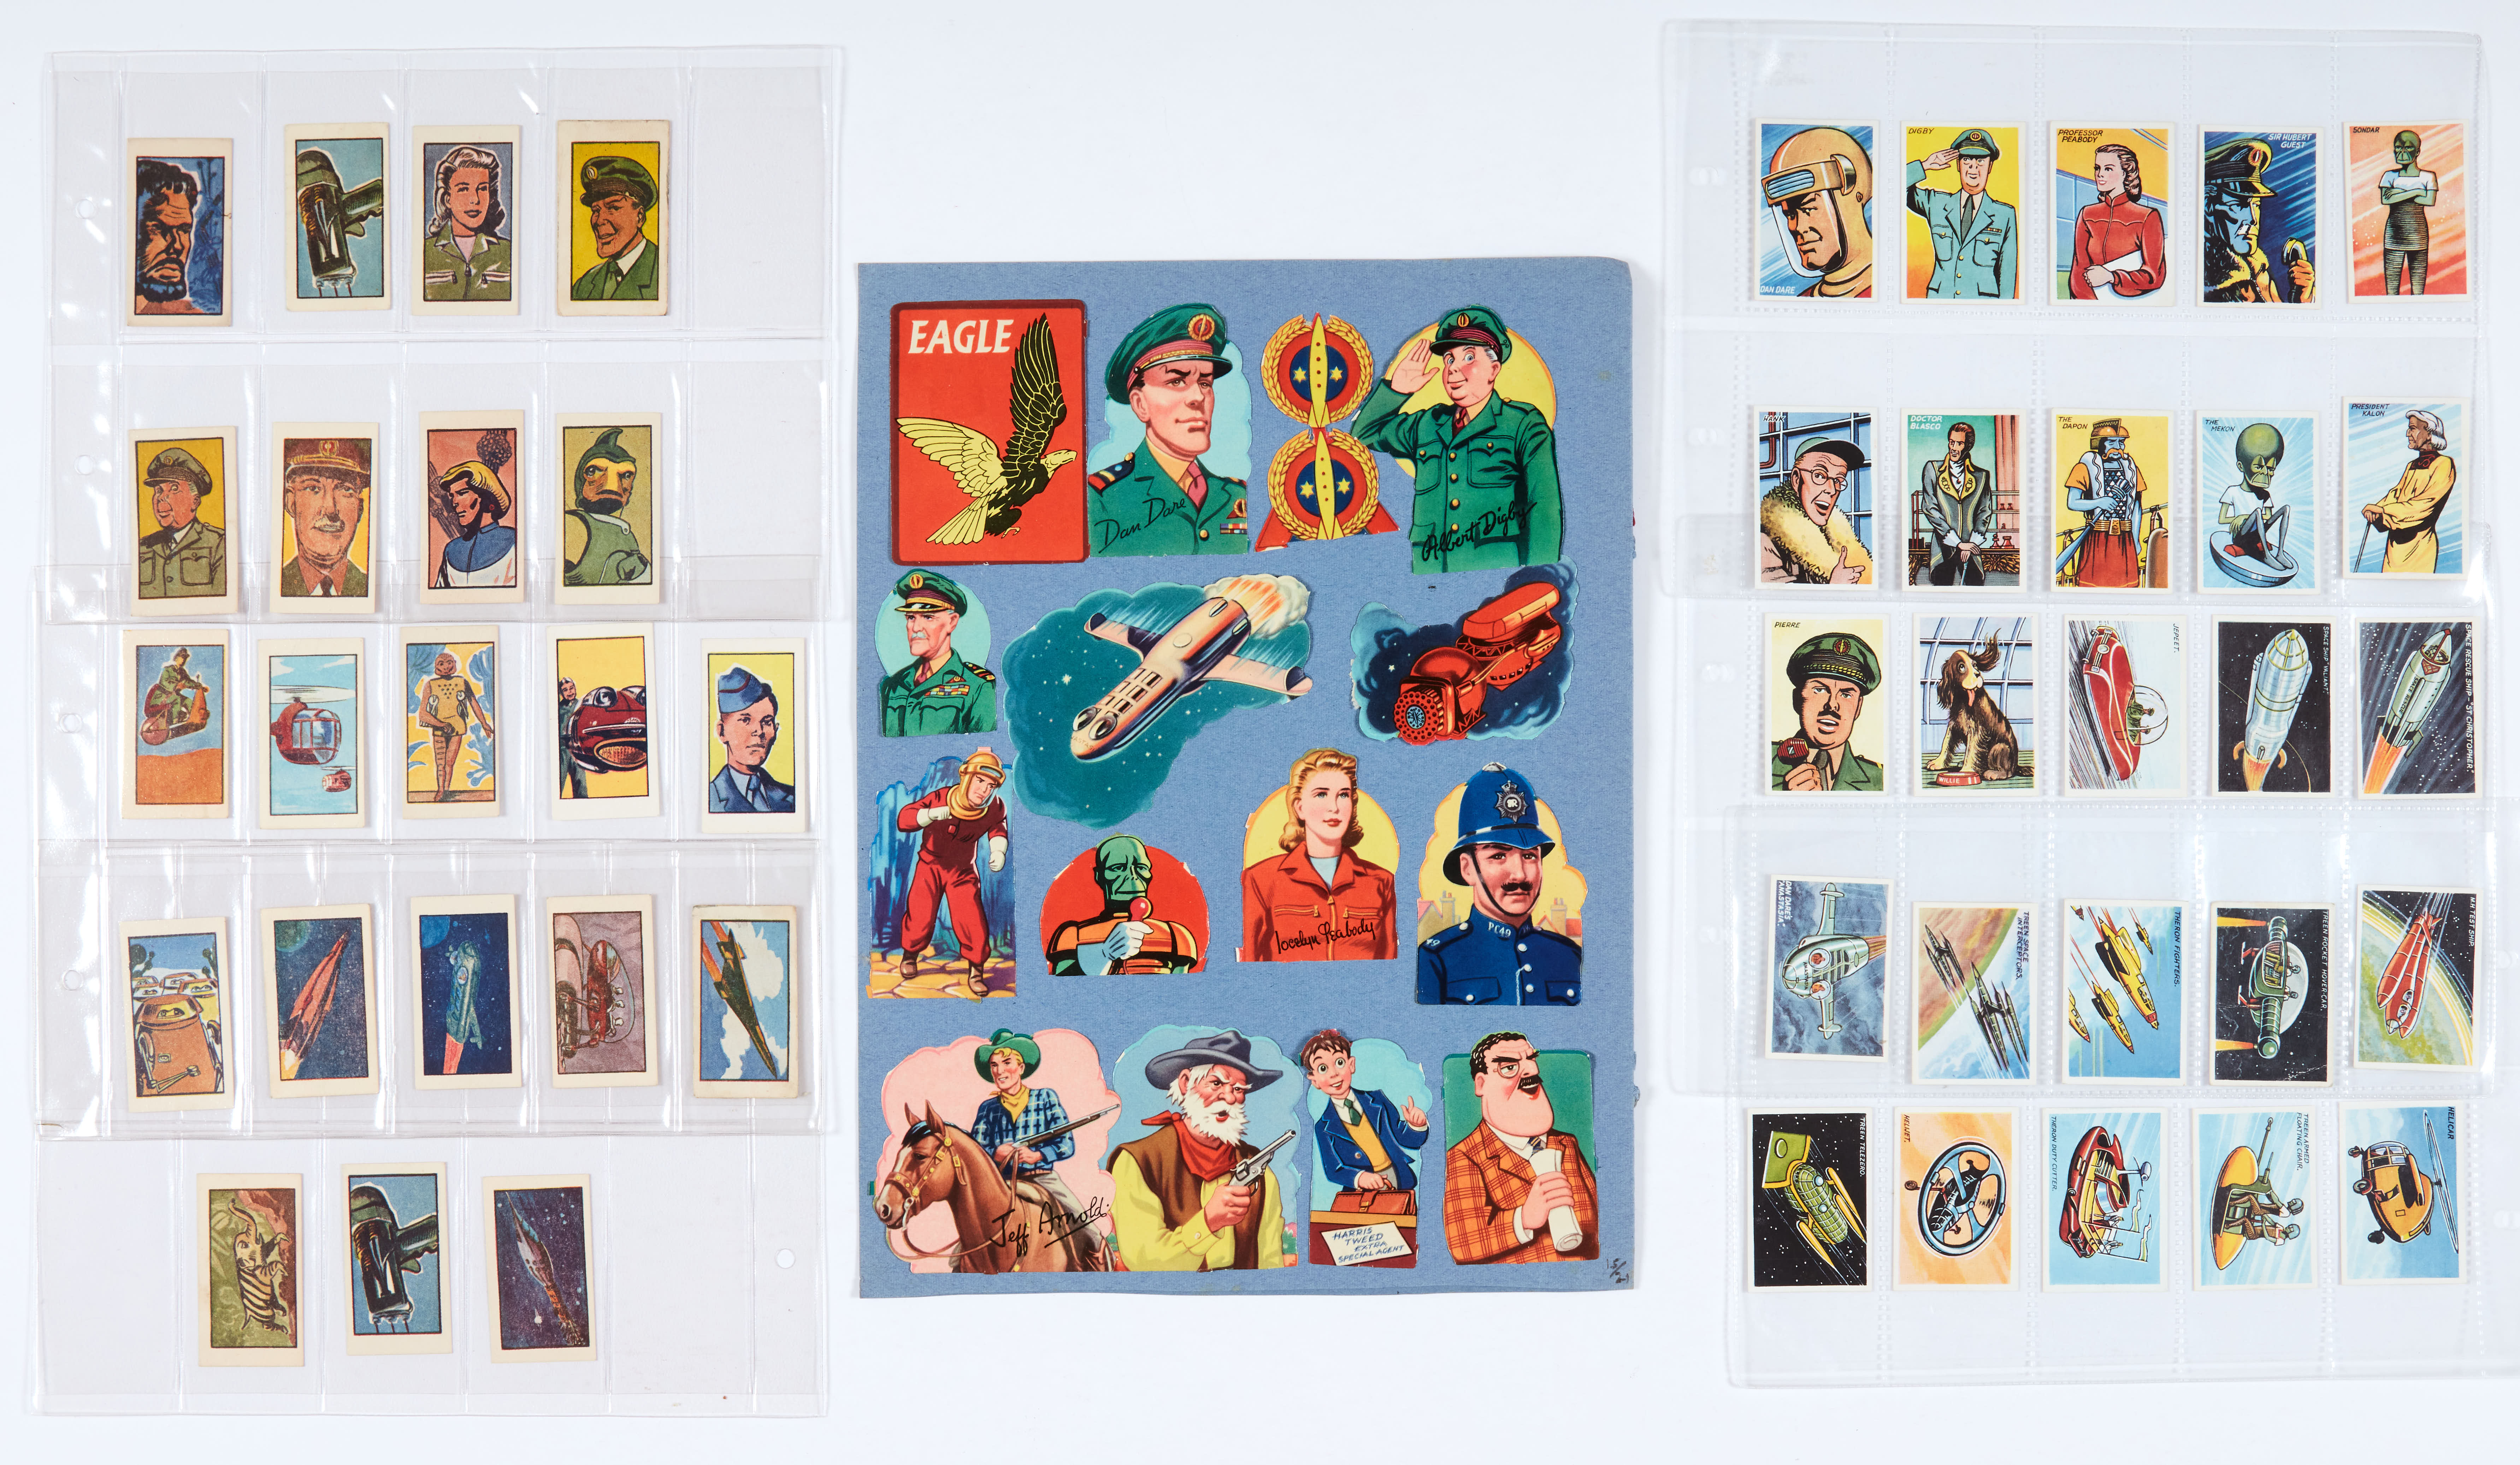 Dan Dare Picture Cards (1953) 1-25 complete set [vfn/nm] (given away with Calvert's Tooth Powder)